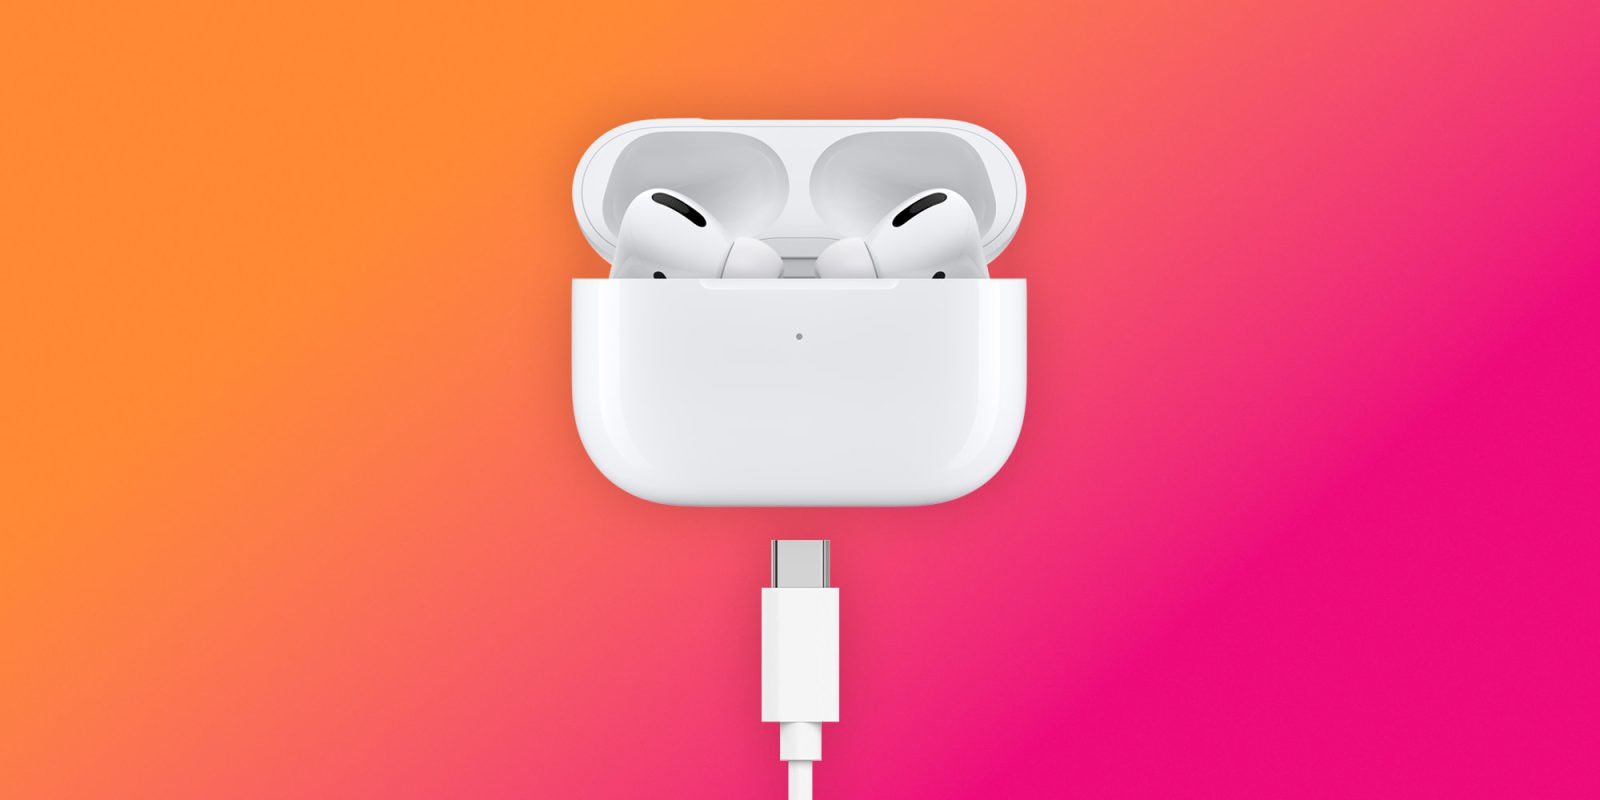 AirPods Pro with a USB-C charging